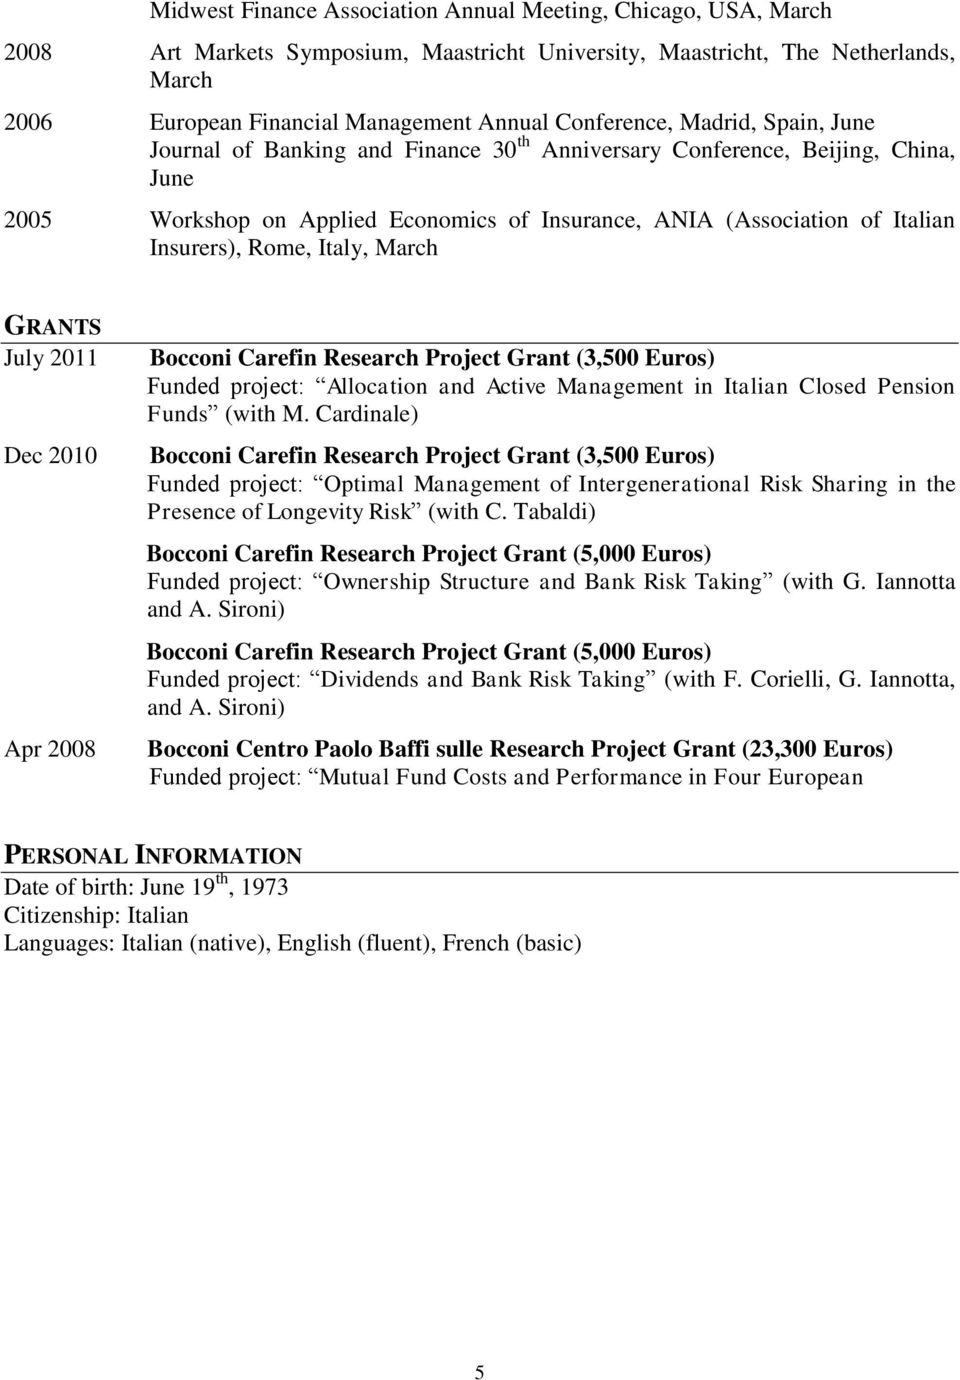 Insurers), Rome, Italy, March GRANTS July 2011 Dec 2010 Apr 2008 Bocconi Carefin Research Project Grant (3,500 Euros) Funded project: Allocation and Active Management in Italian Closed Pension Funds